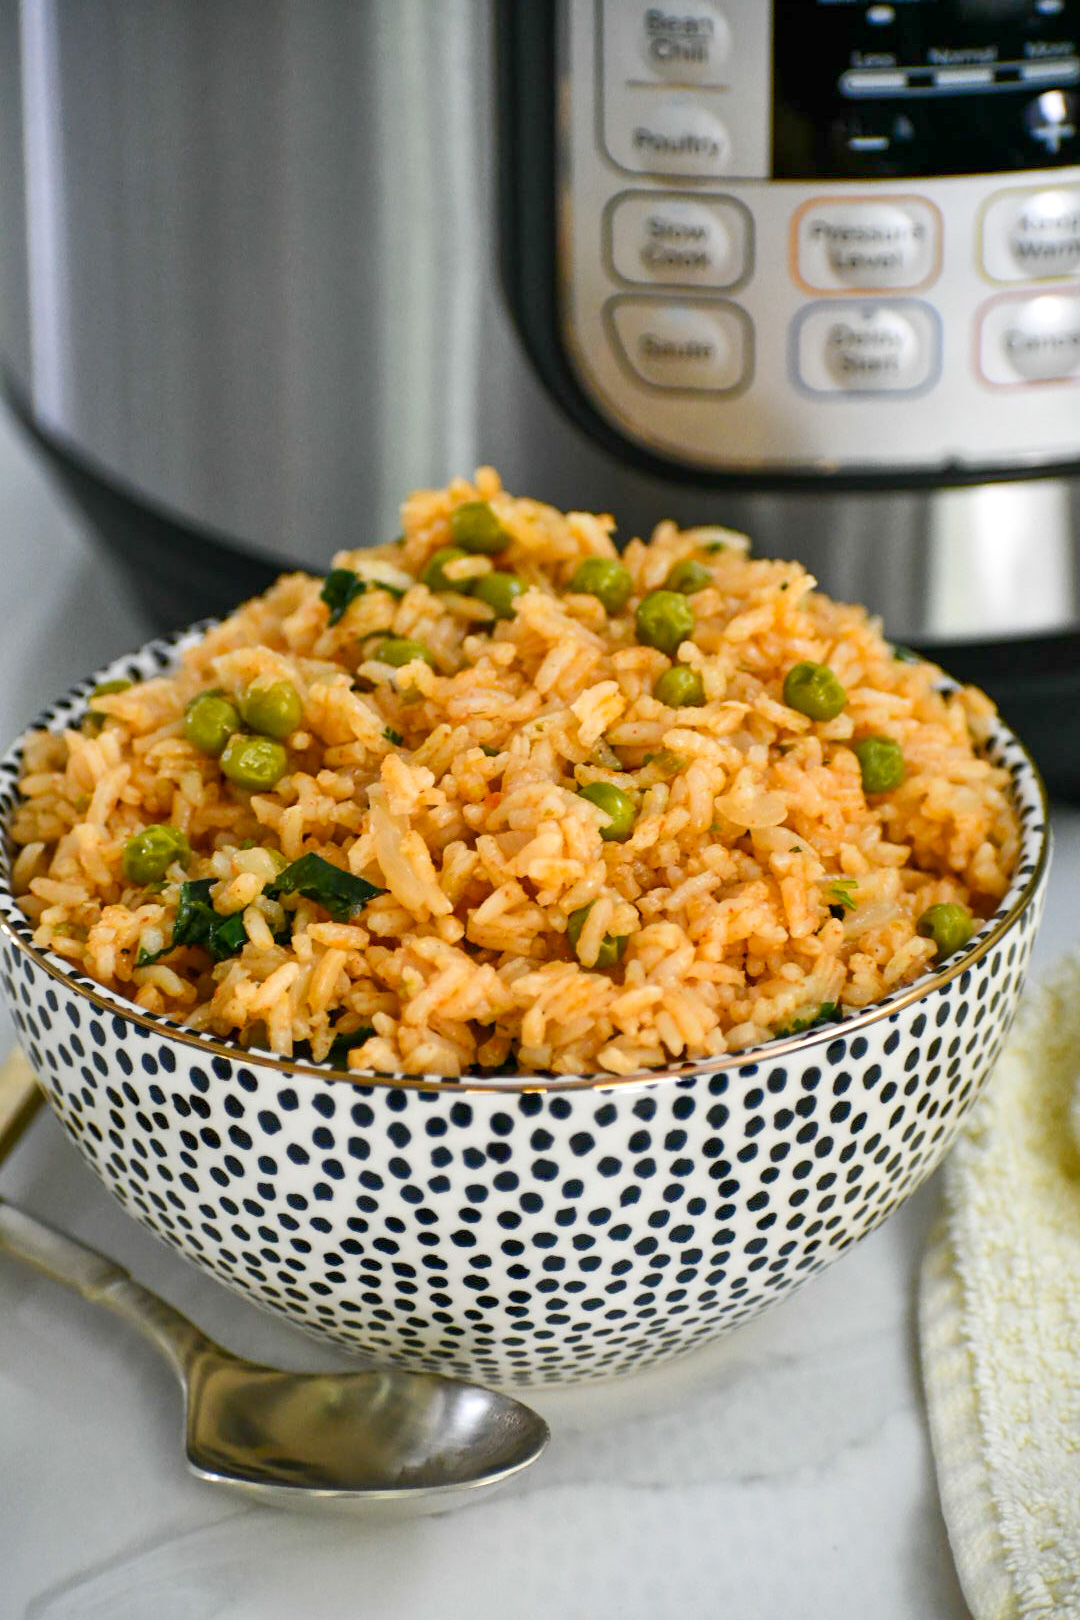 Quick and Easy Pressure Cooker (Instant Pot) Spanish Rice